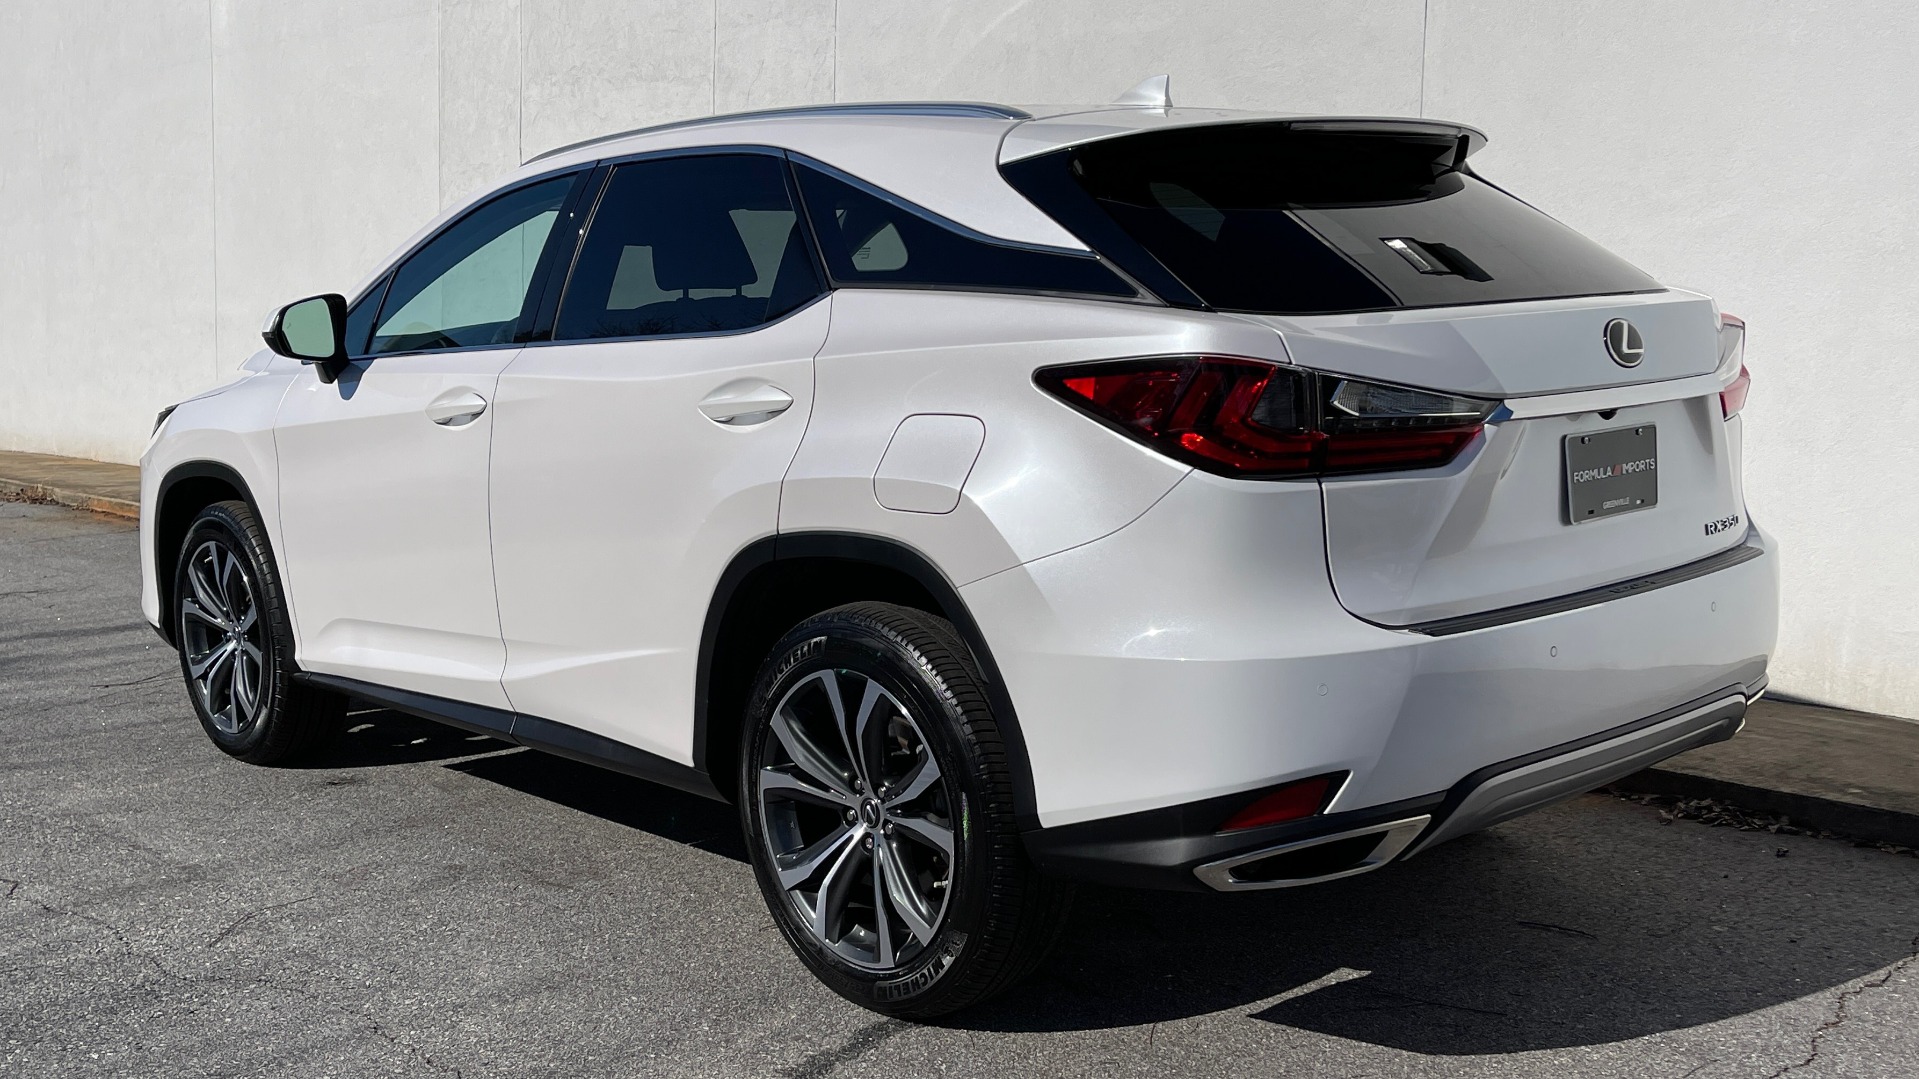 Used 2020 Lexus RX 350 PREMIUM 3.5L SUV / SUNROOF / TOW PREP / VENT STS / REARVIEW for sale Sold at Formula Imports in Charlotte NC 28227 3